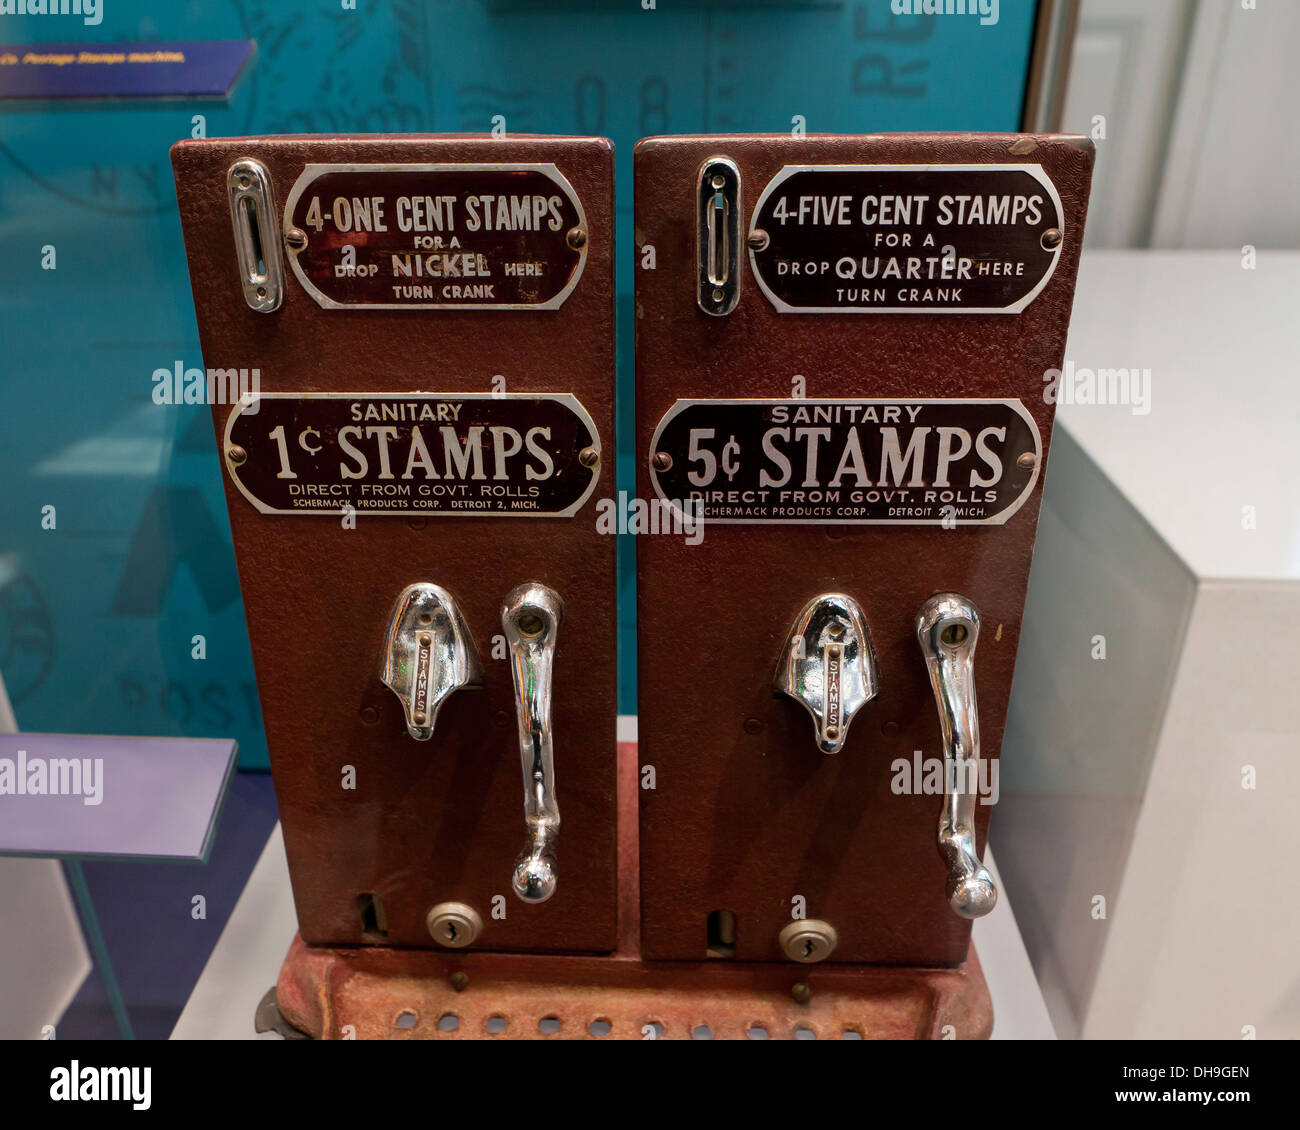 Vintage US 1 cent and 5 cent stamp dispensers Stock Photo